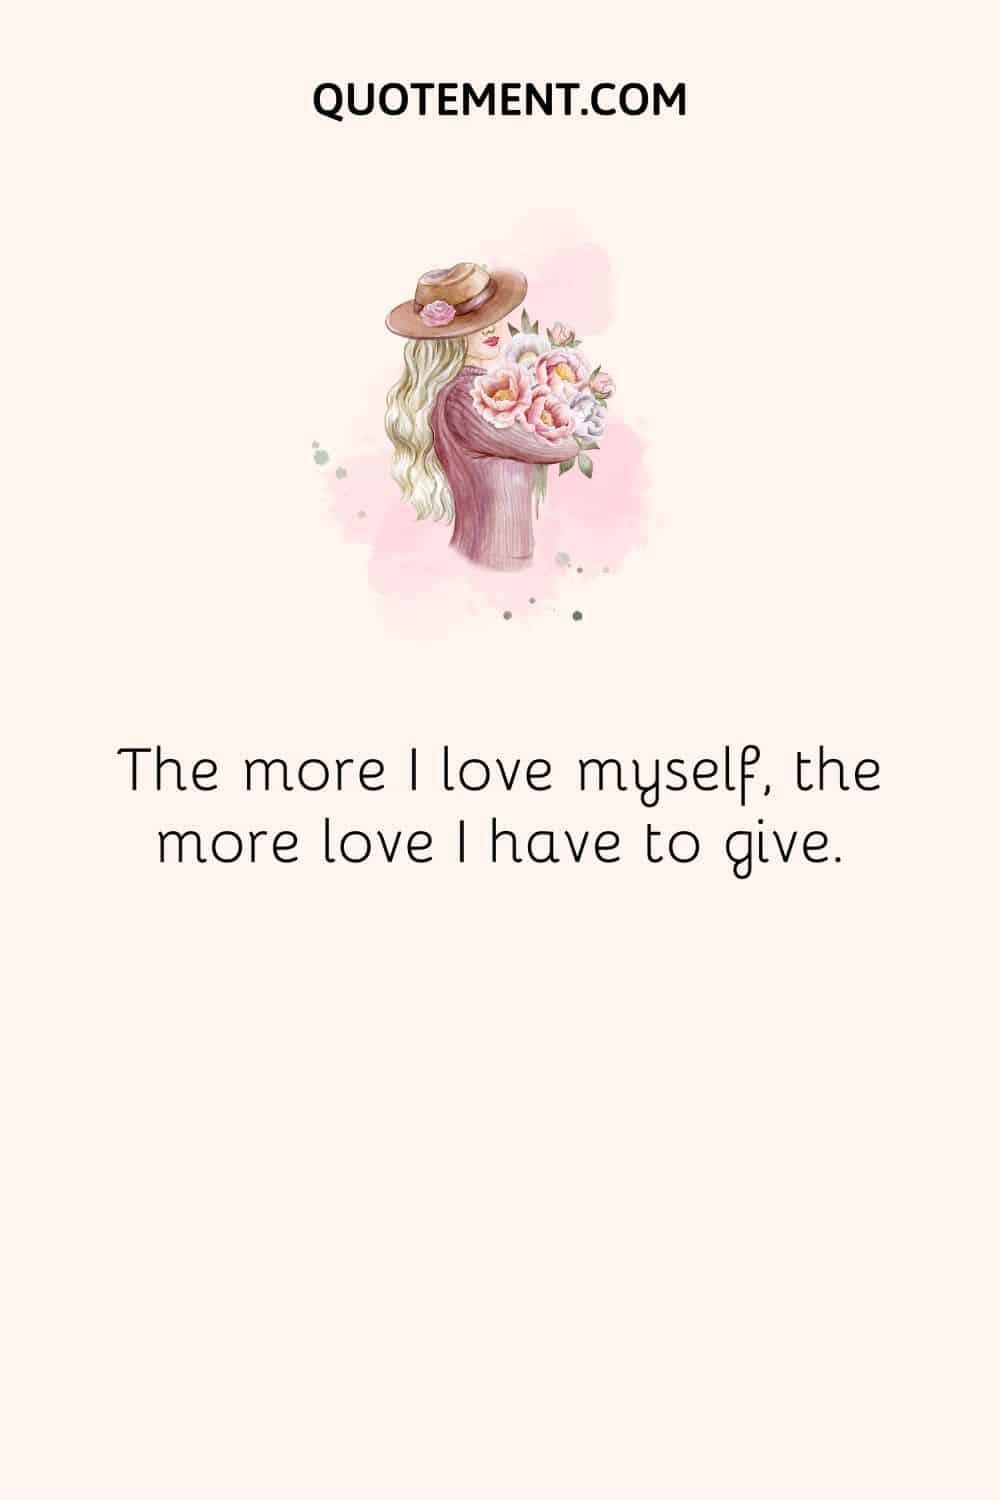 The more I love myself, the more love I have to give